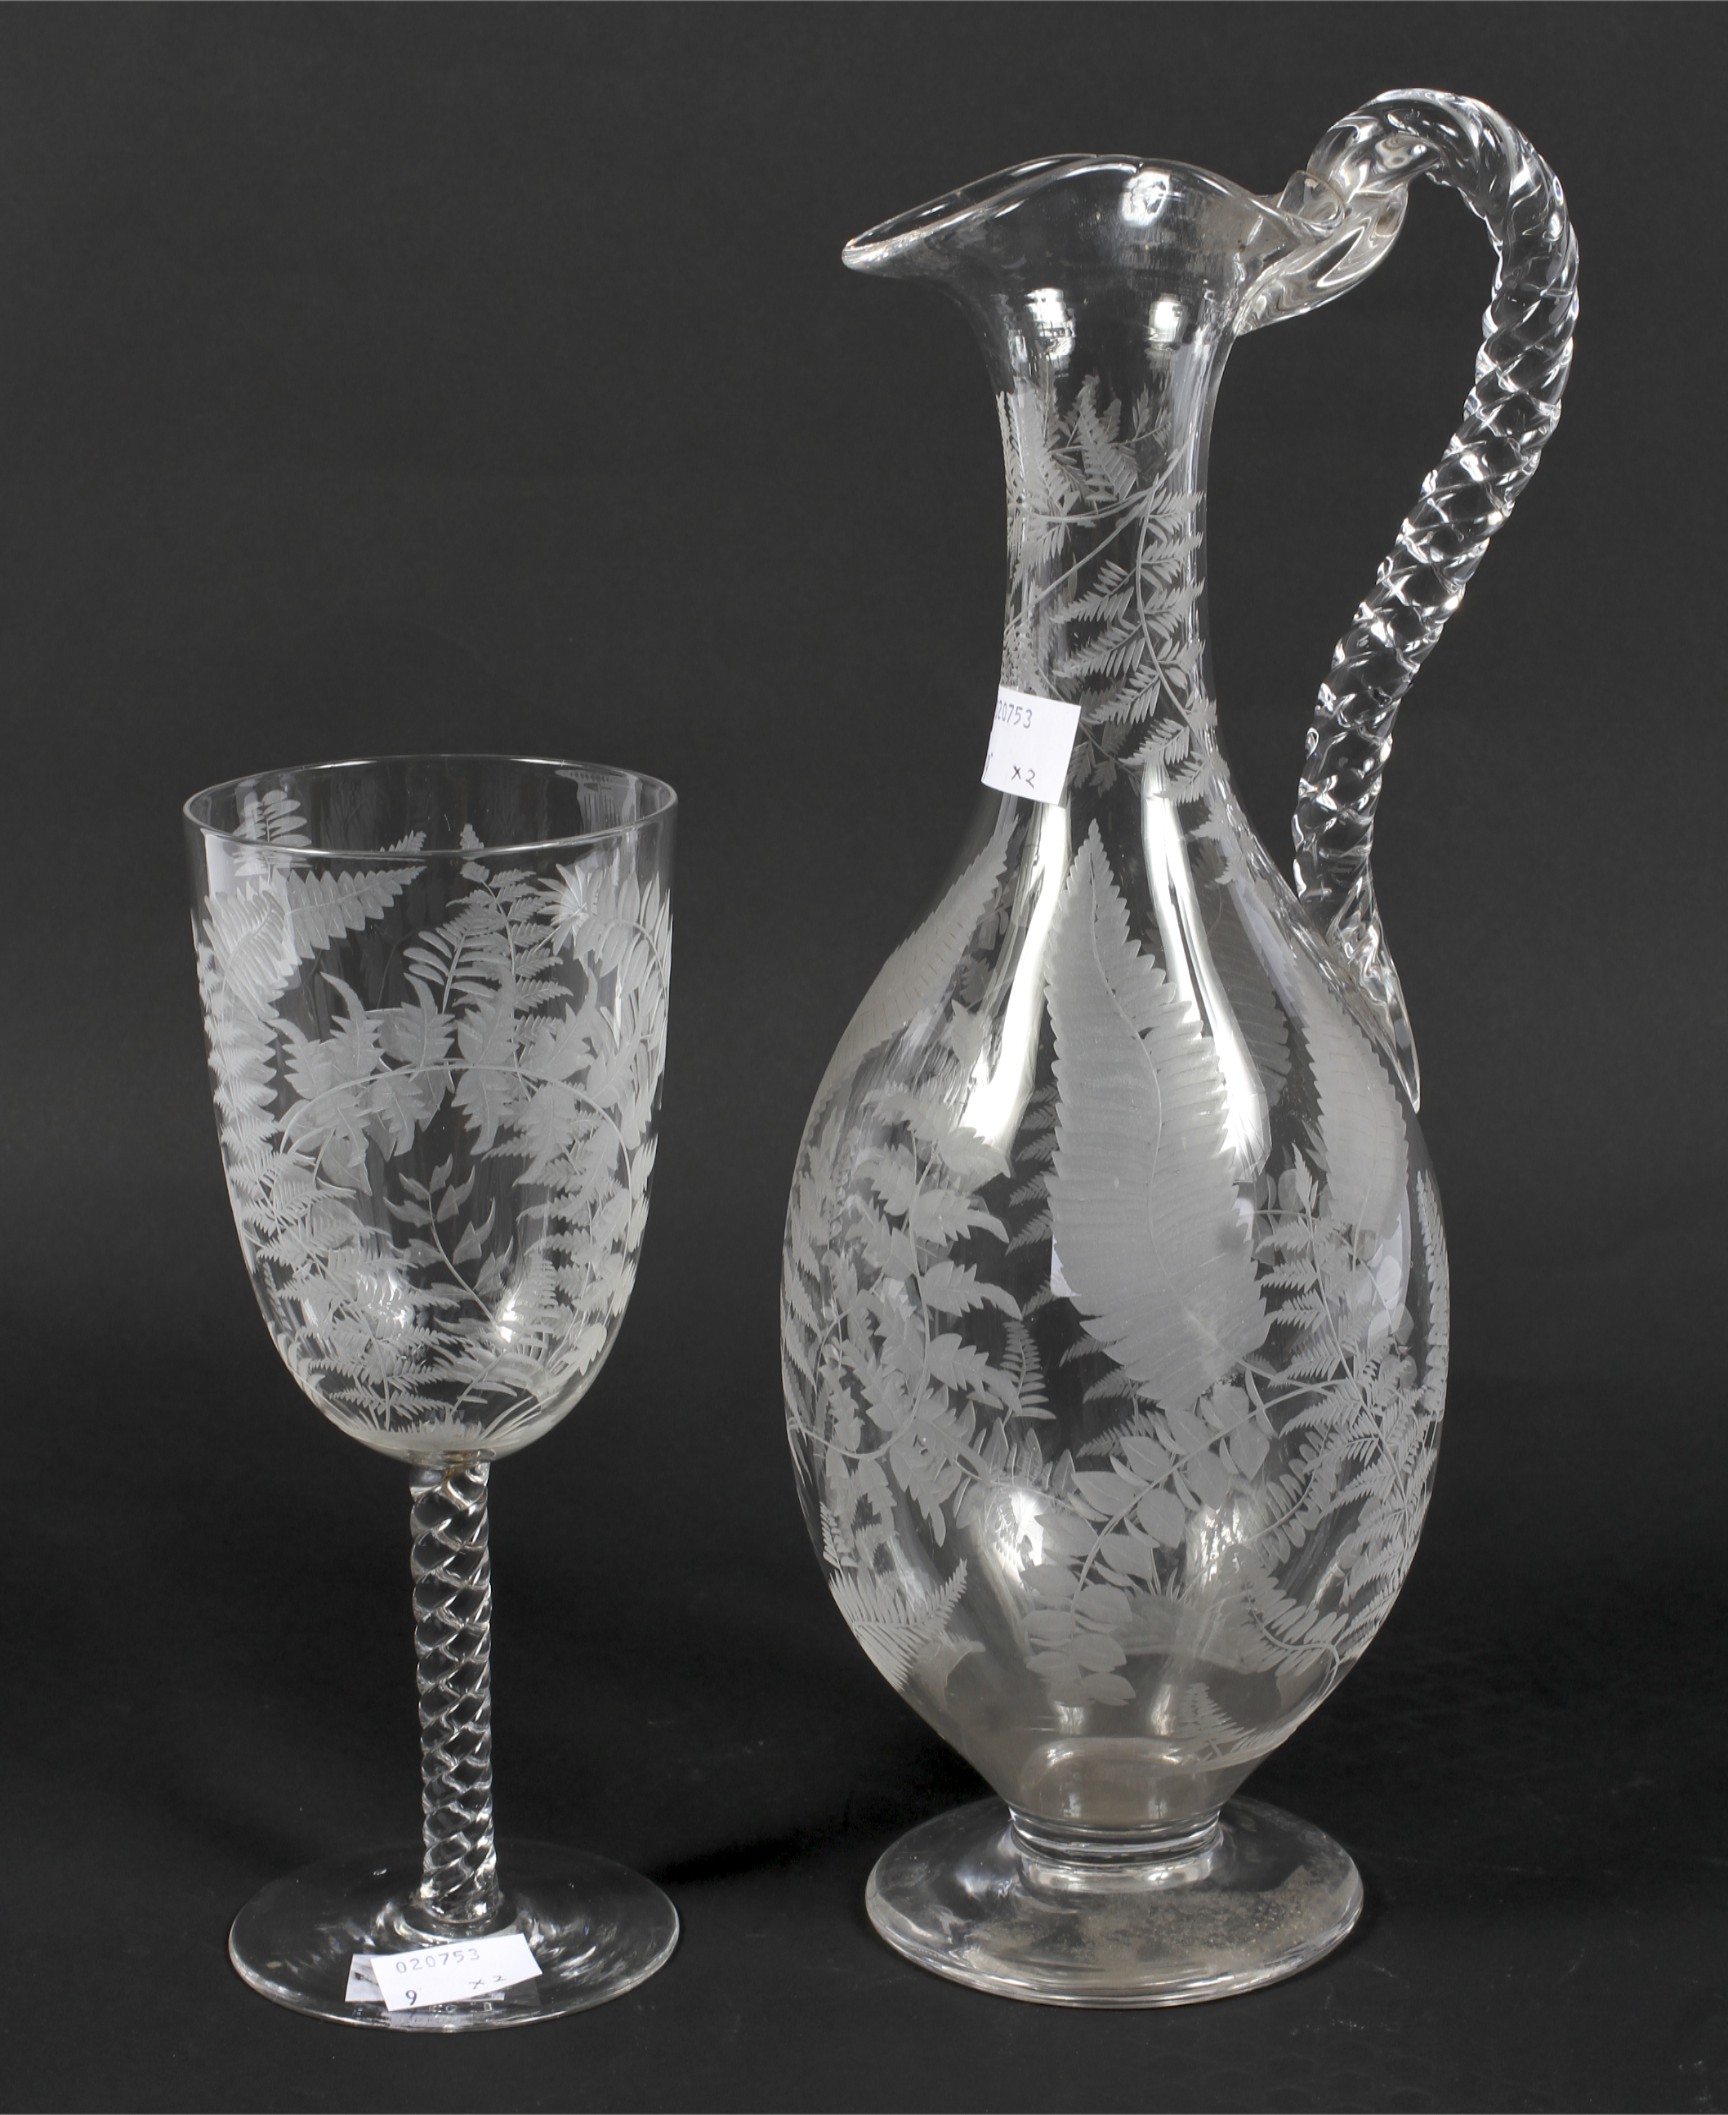 A 19th century engraved glass pouring jug and matching glass.